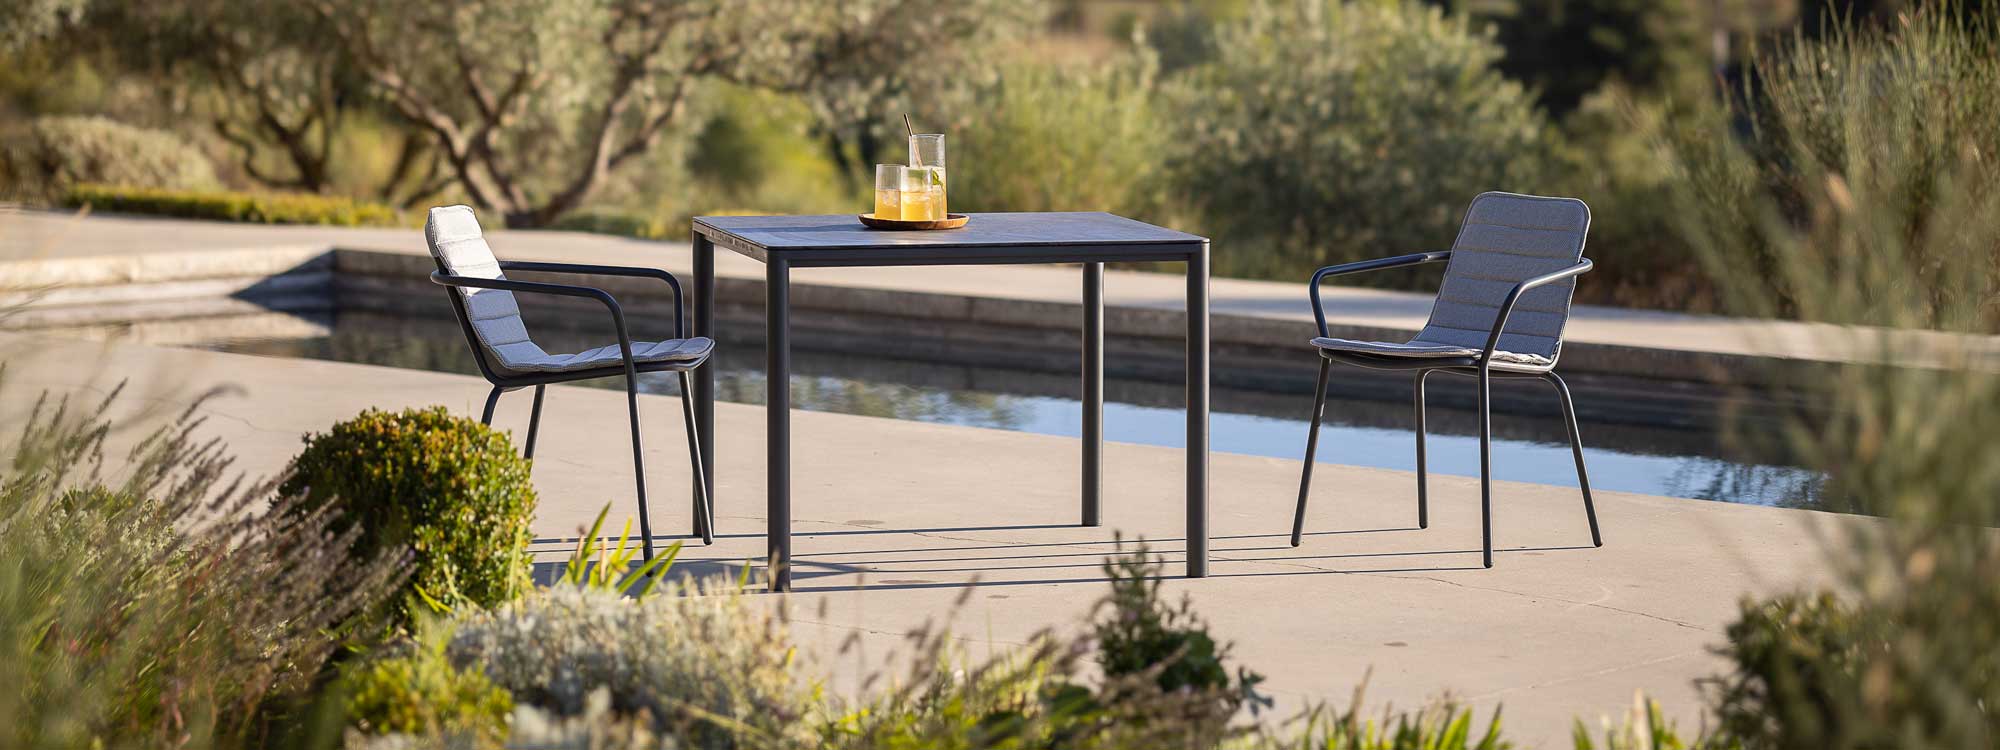 Image of Todus Alca modern garden table and Starling dining chairs with swimming pool and olive trees in the background